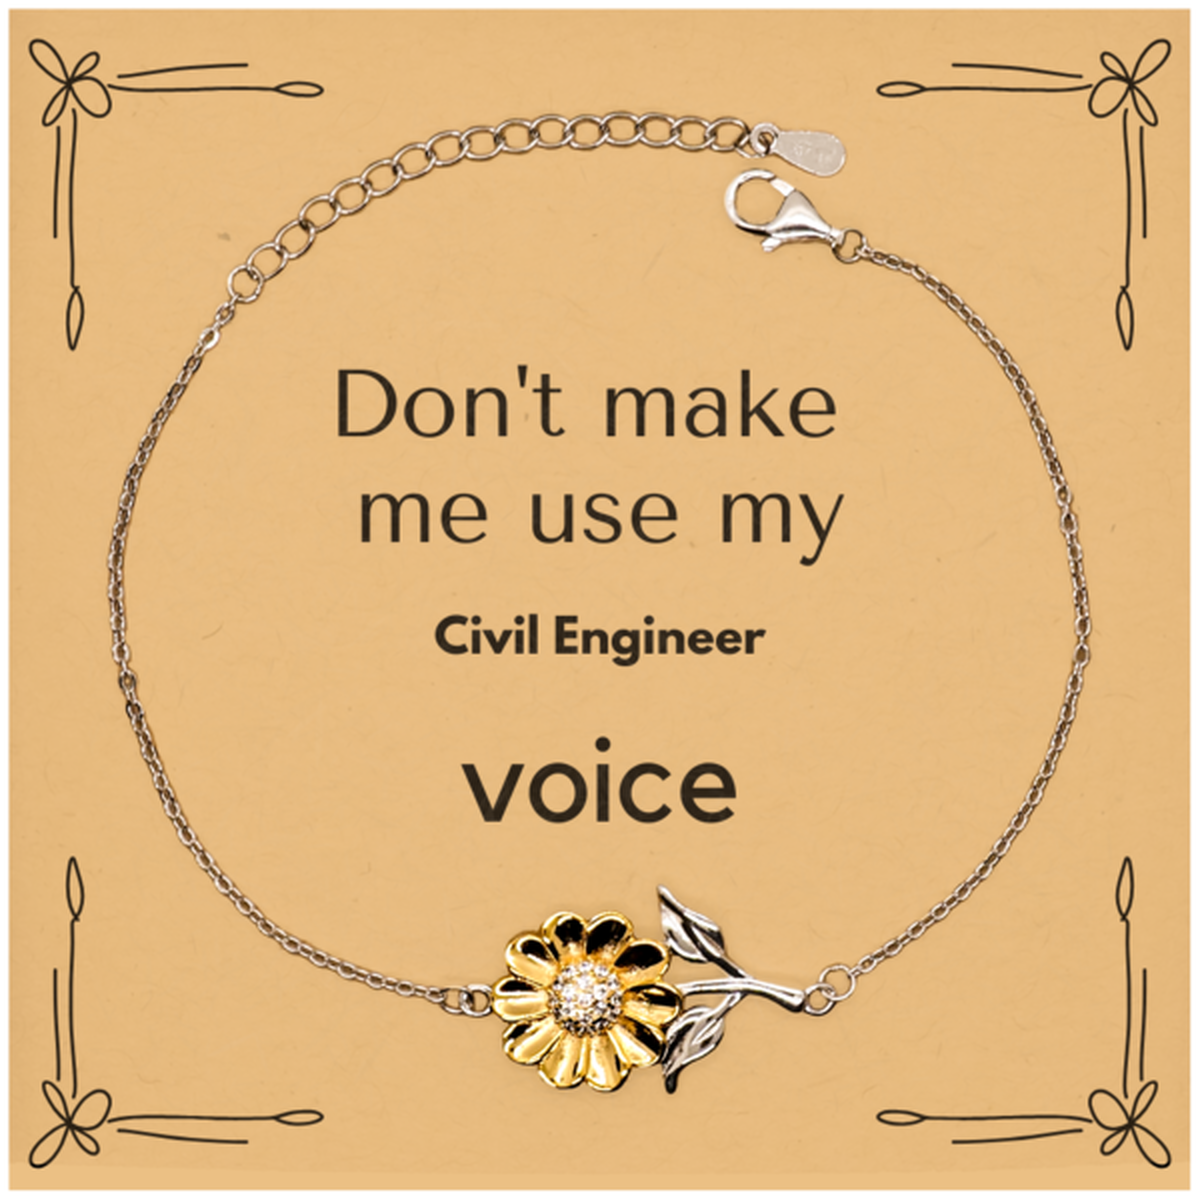 Don't make me use my Civil Engineer voice, Sarcasm Civil Engineer Card Gifts, Christmas Civil Engineer Sunflower Bracelet Birthday Unique Gifts For Civil Engineer Coworkers, Men, Women, Colleague, Friends